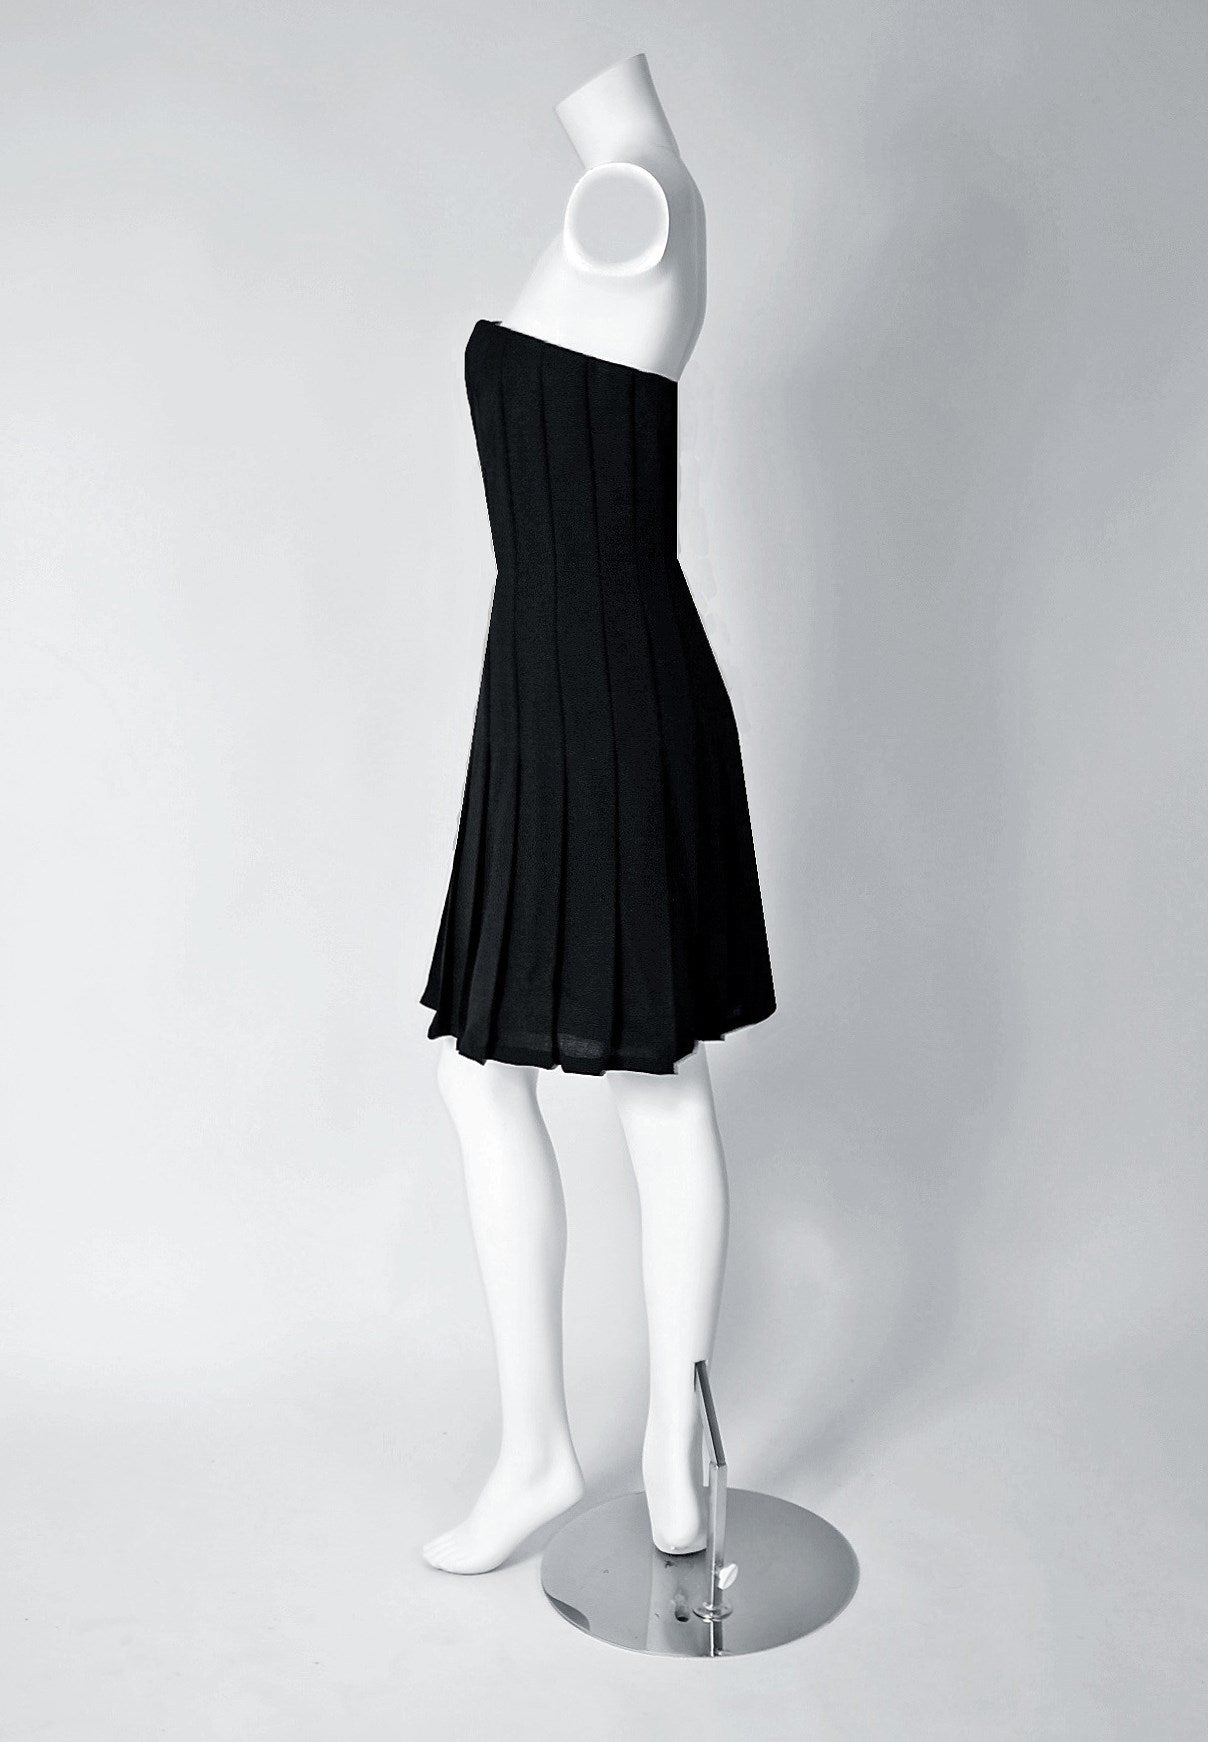 In 1975 Bill Blass brought back the cocktail dress, which had all but disappeared from the fashion scene. This captivating black rayon-crepe number, from the early 1990's, has everything a woman wants. The bodice is a low-cut plunge boned strapless.